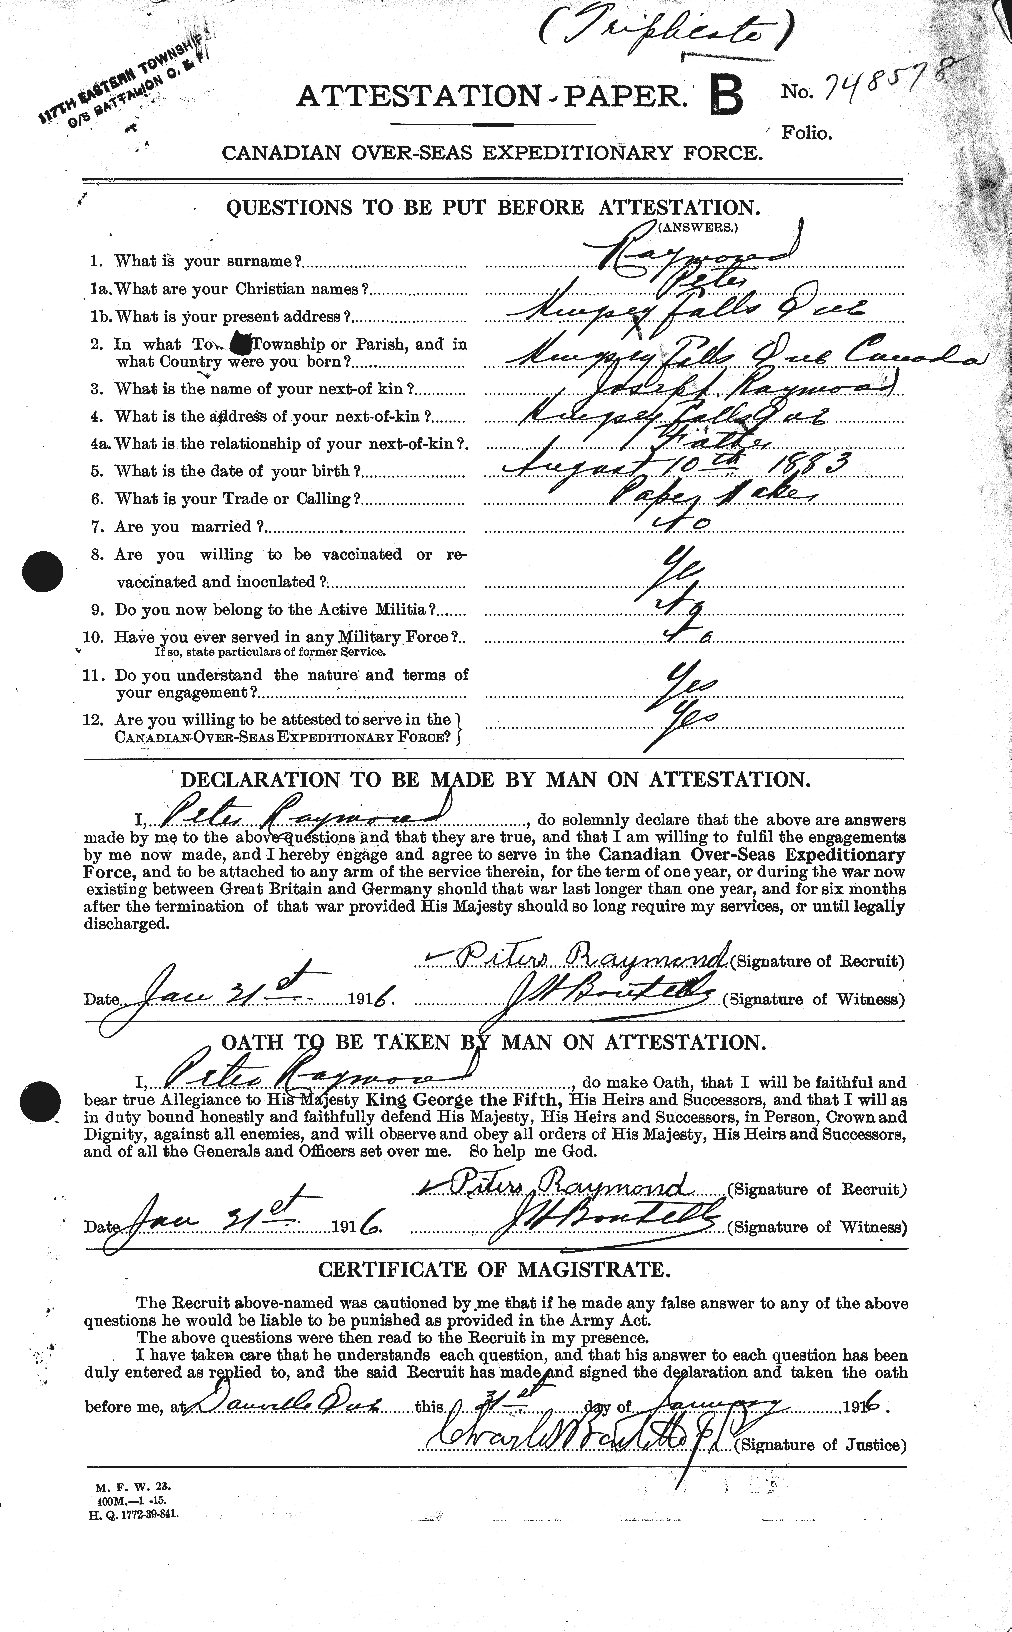 Personnel Records of the First World War - CEF 595441a